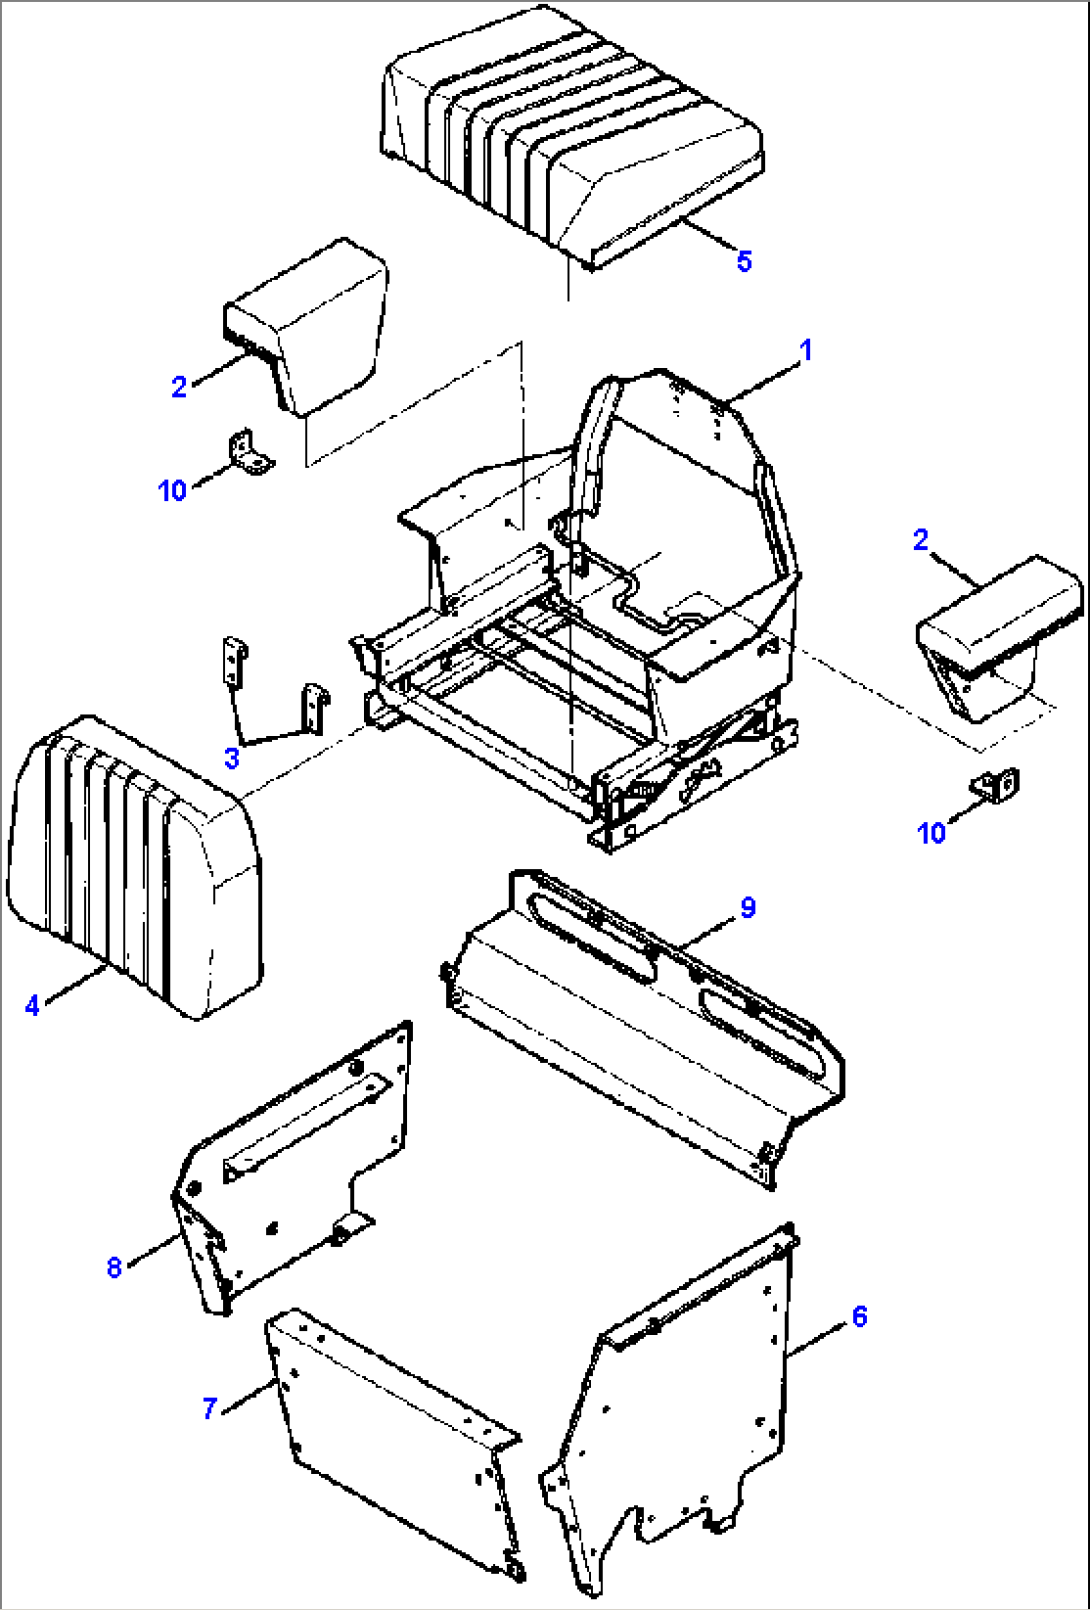 STATIC SEAT AND SUPPORTS